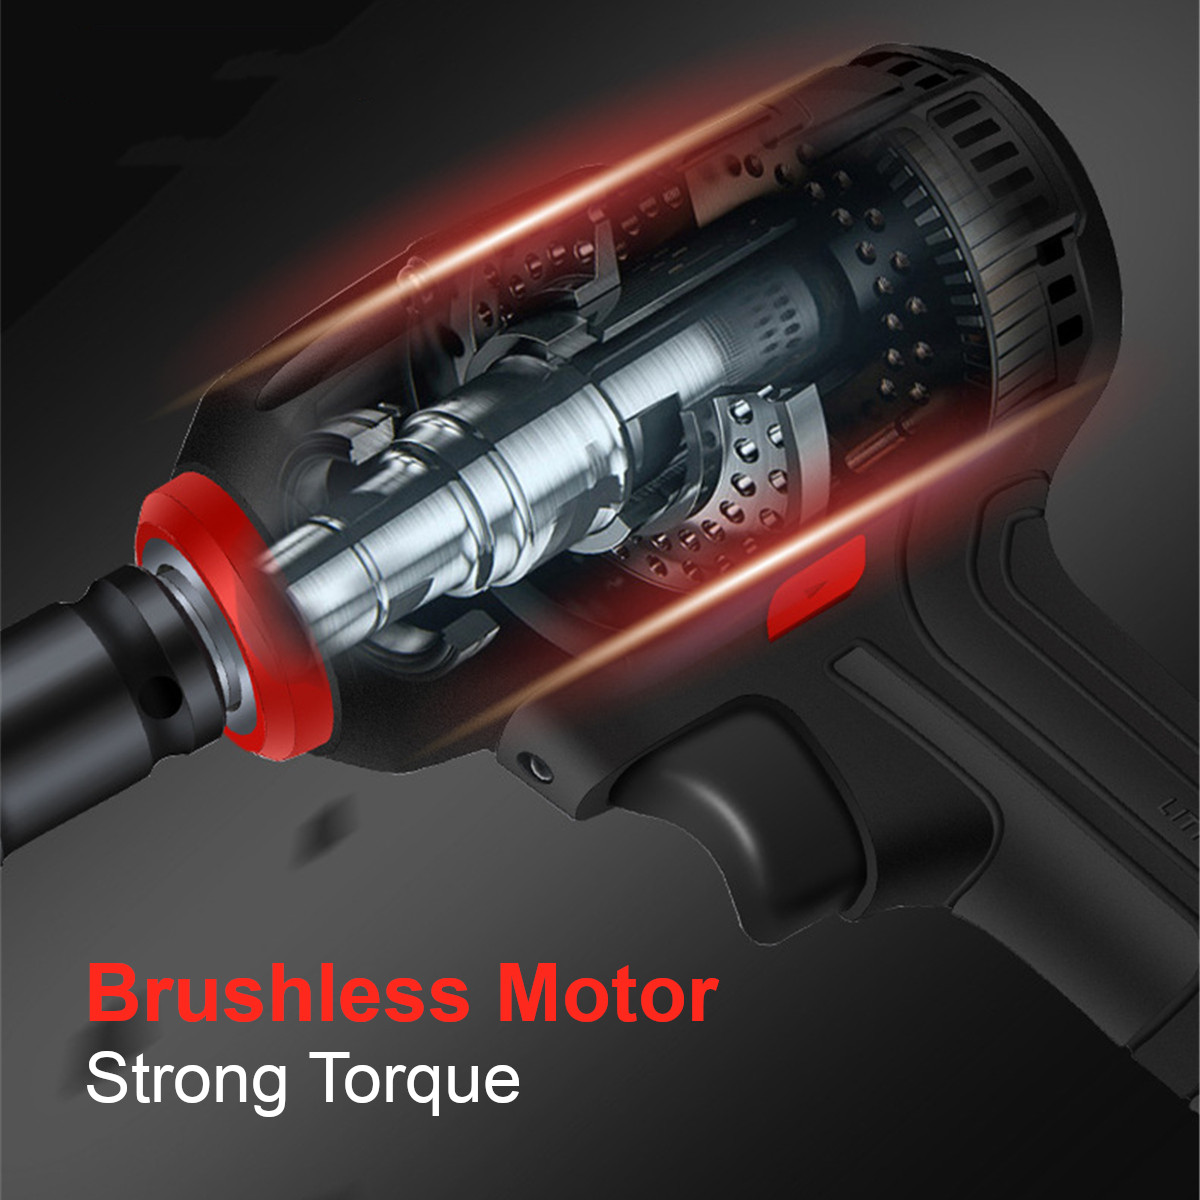 100-240V-21V-Cordless-Brushless-Electric-Wrench-600Nm-Impact-Wrench-20000mAh-Recharge-1790565-7